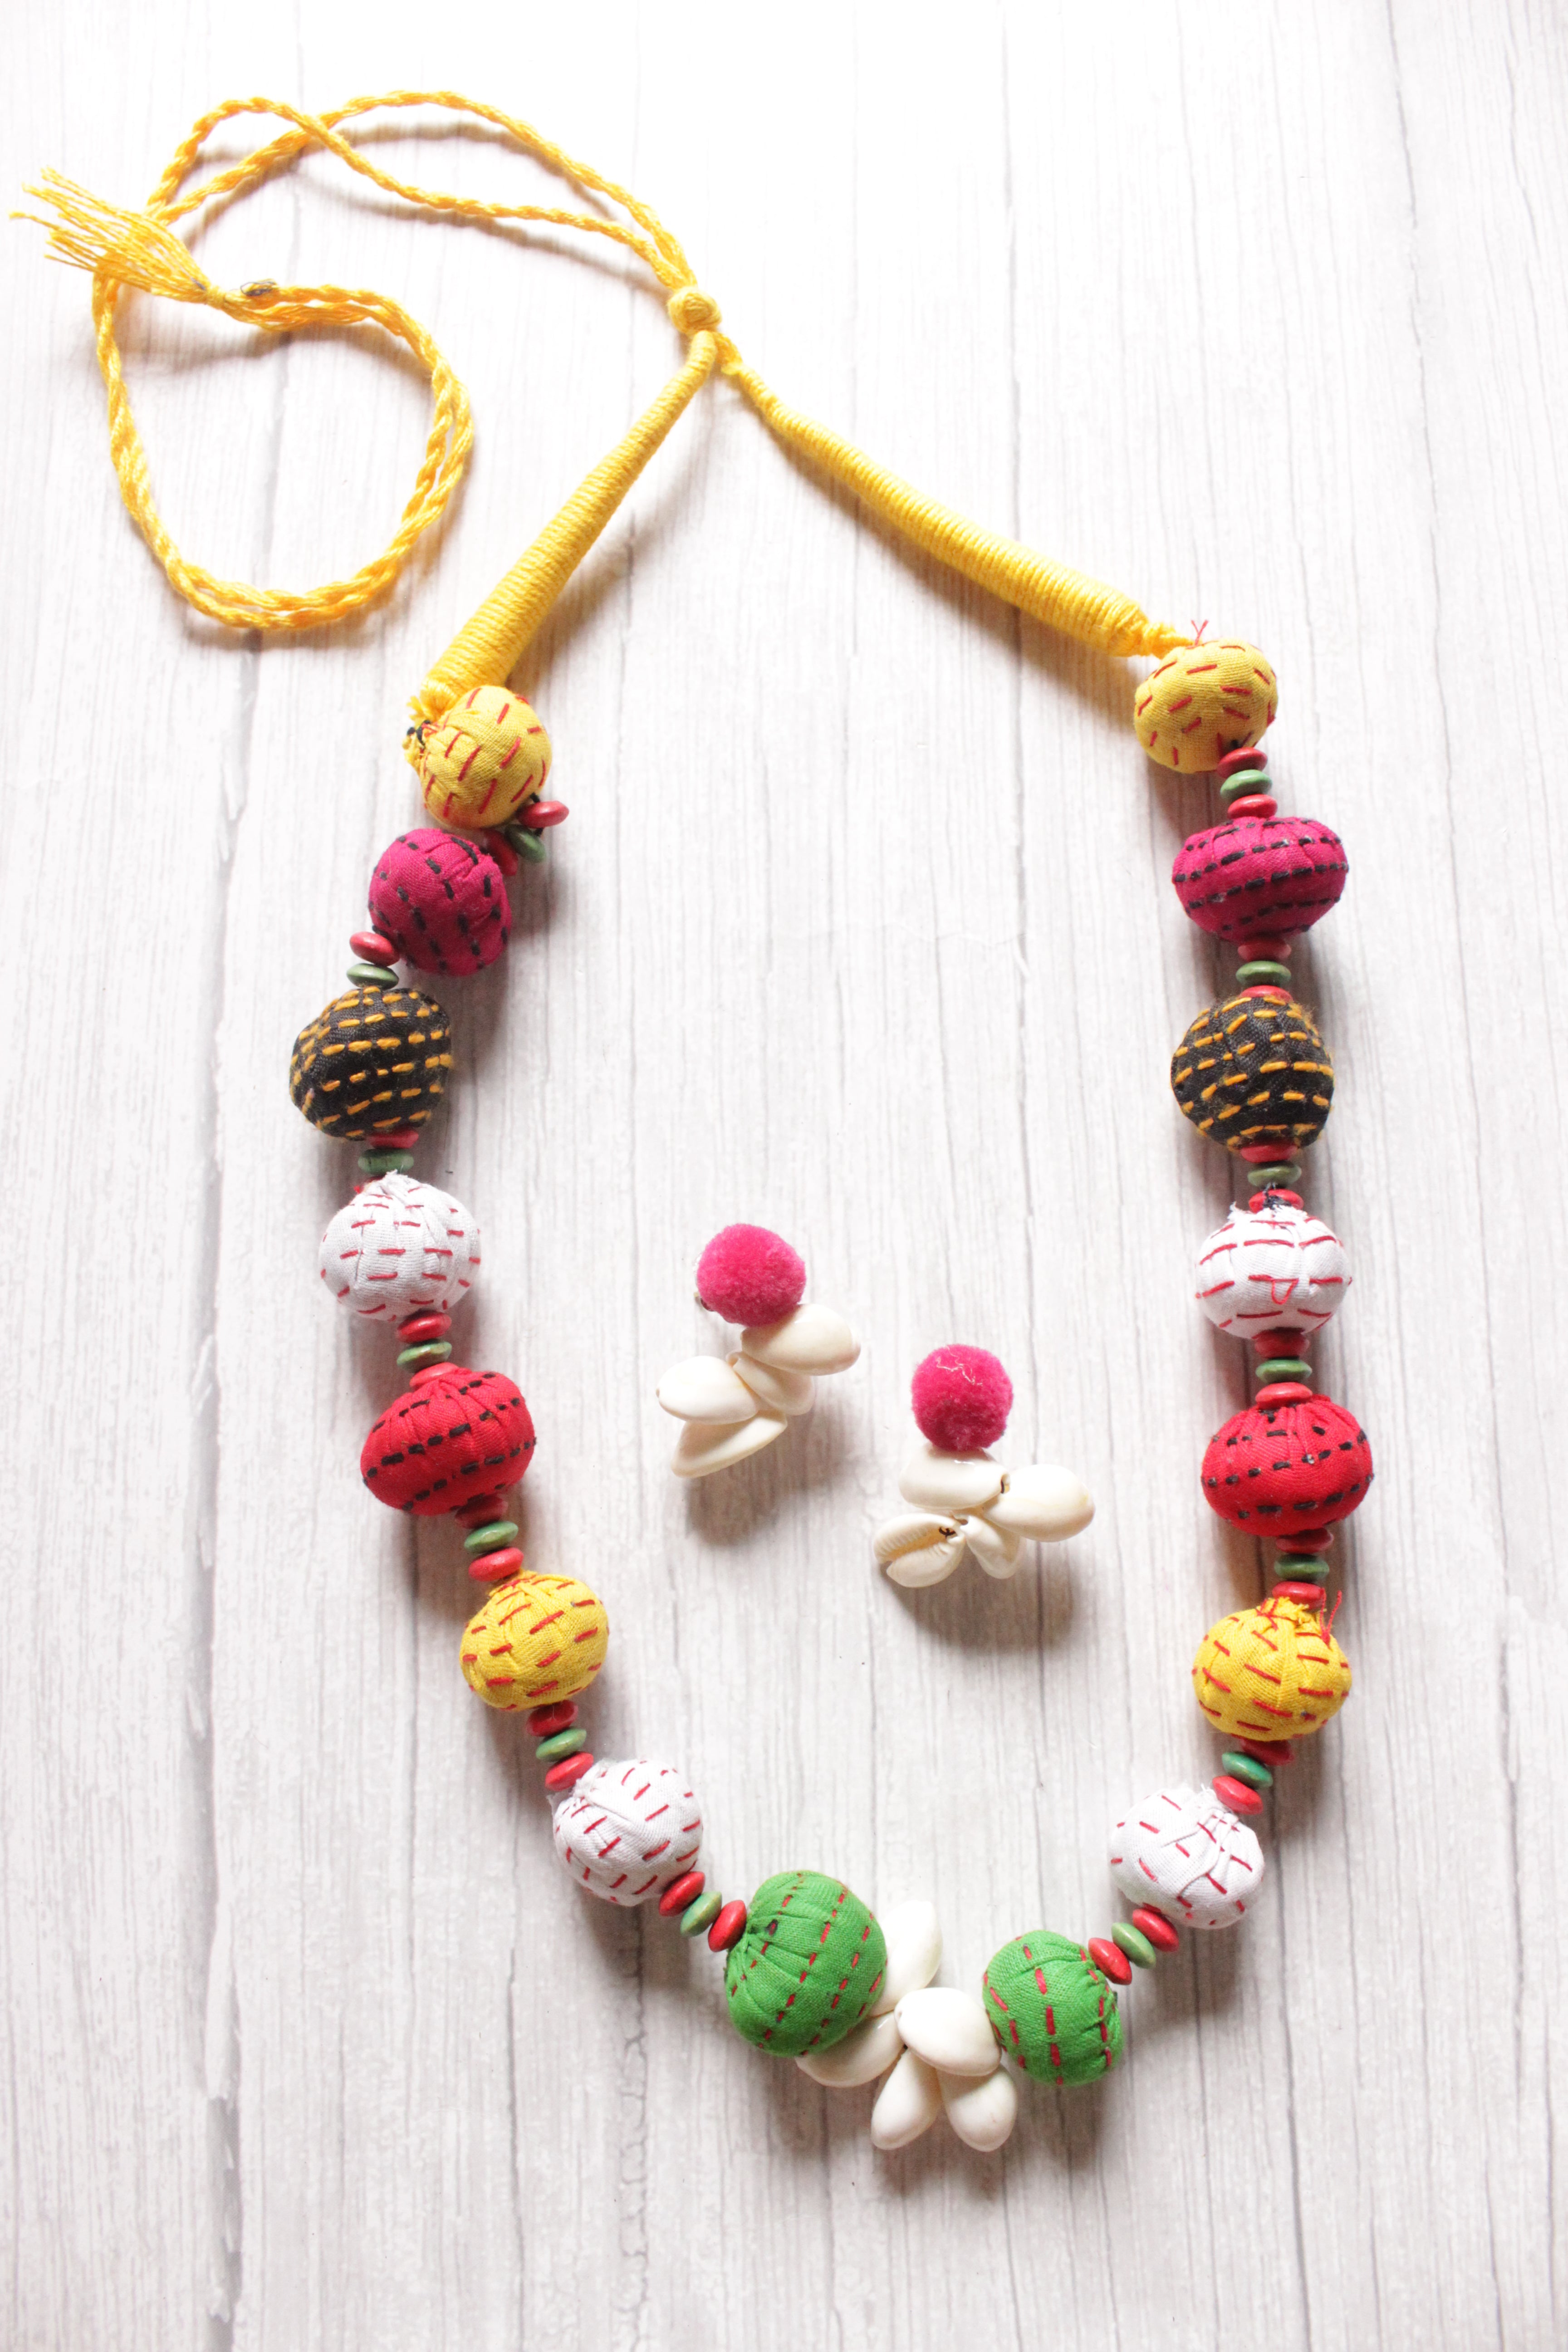 Multi-Color Hand Stitched Fabric Beads and Shell Work Fabric Necklace Set